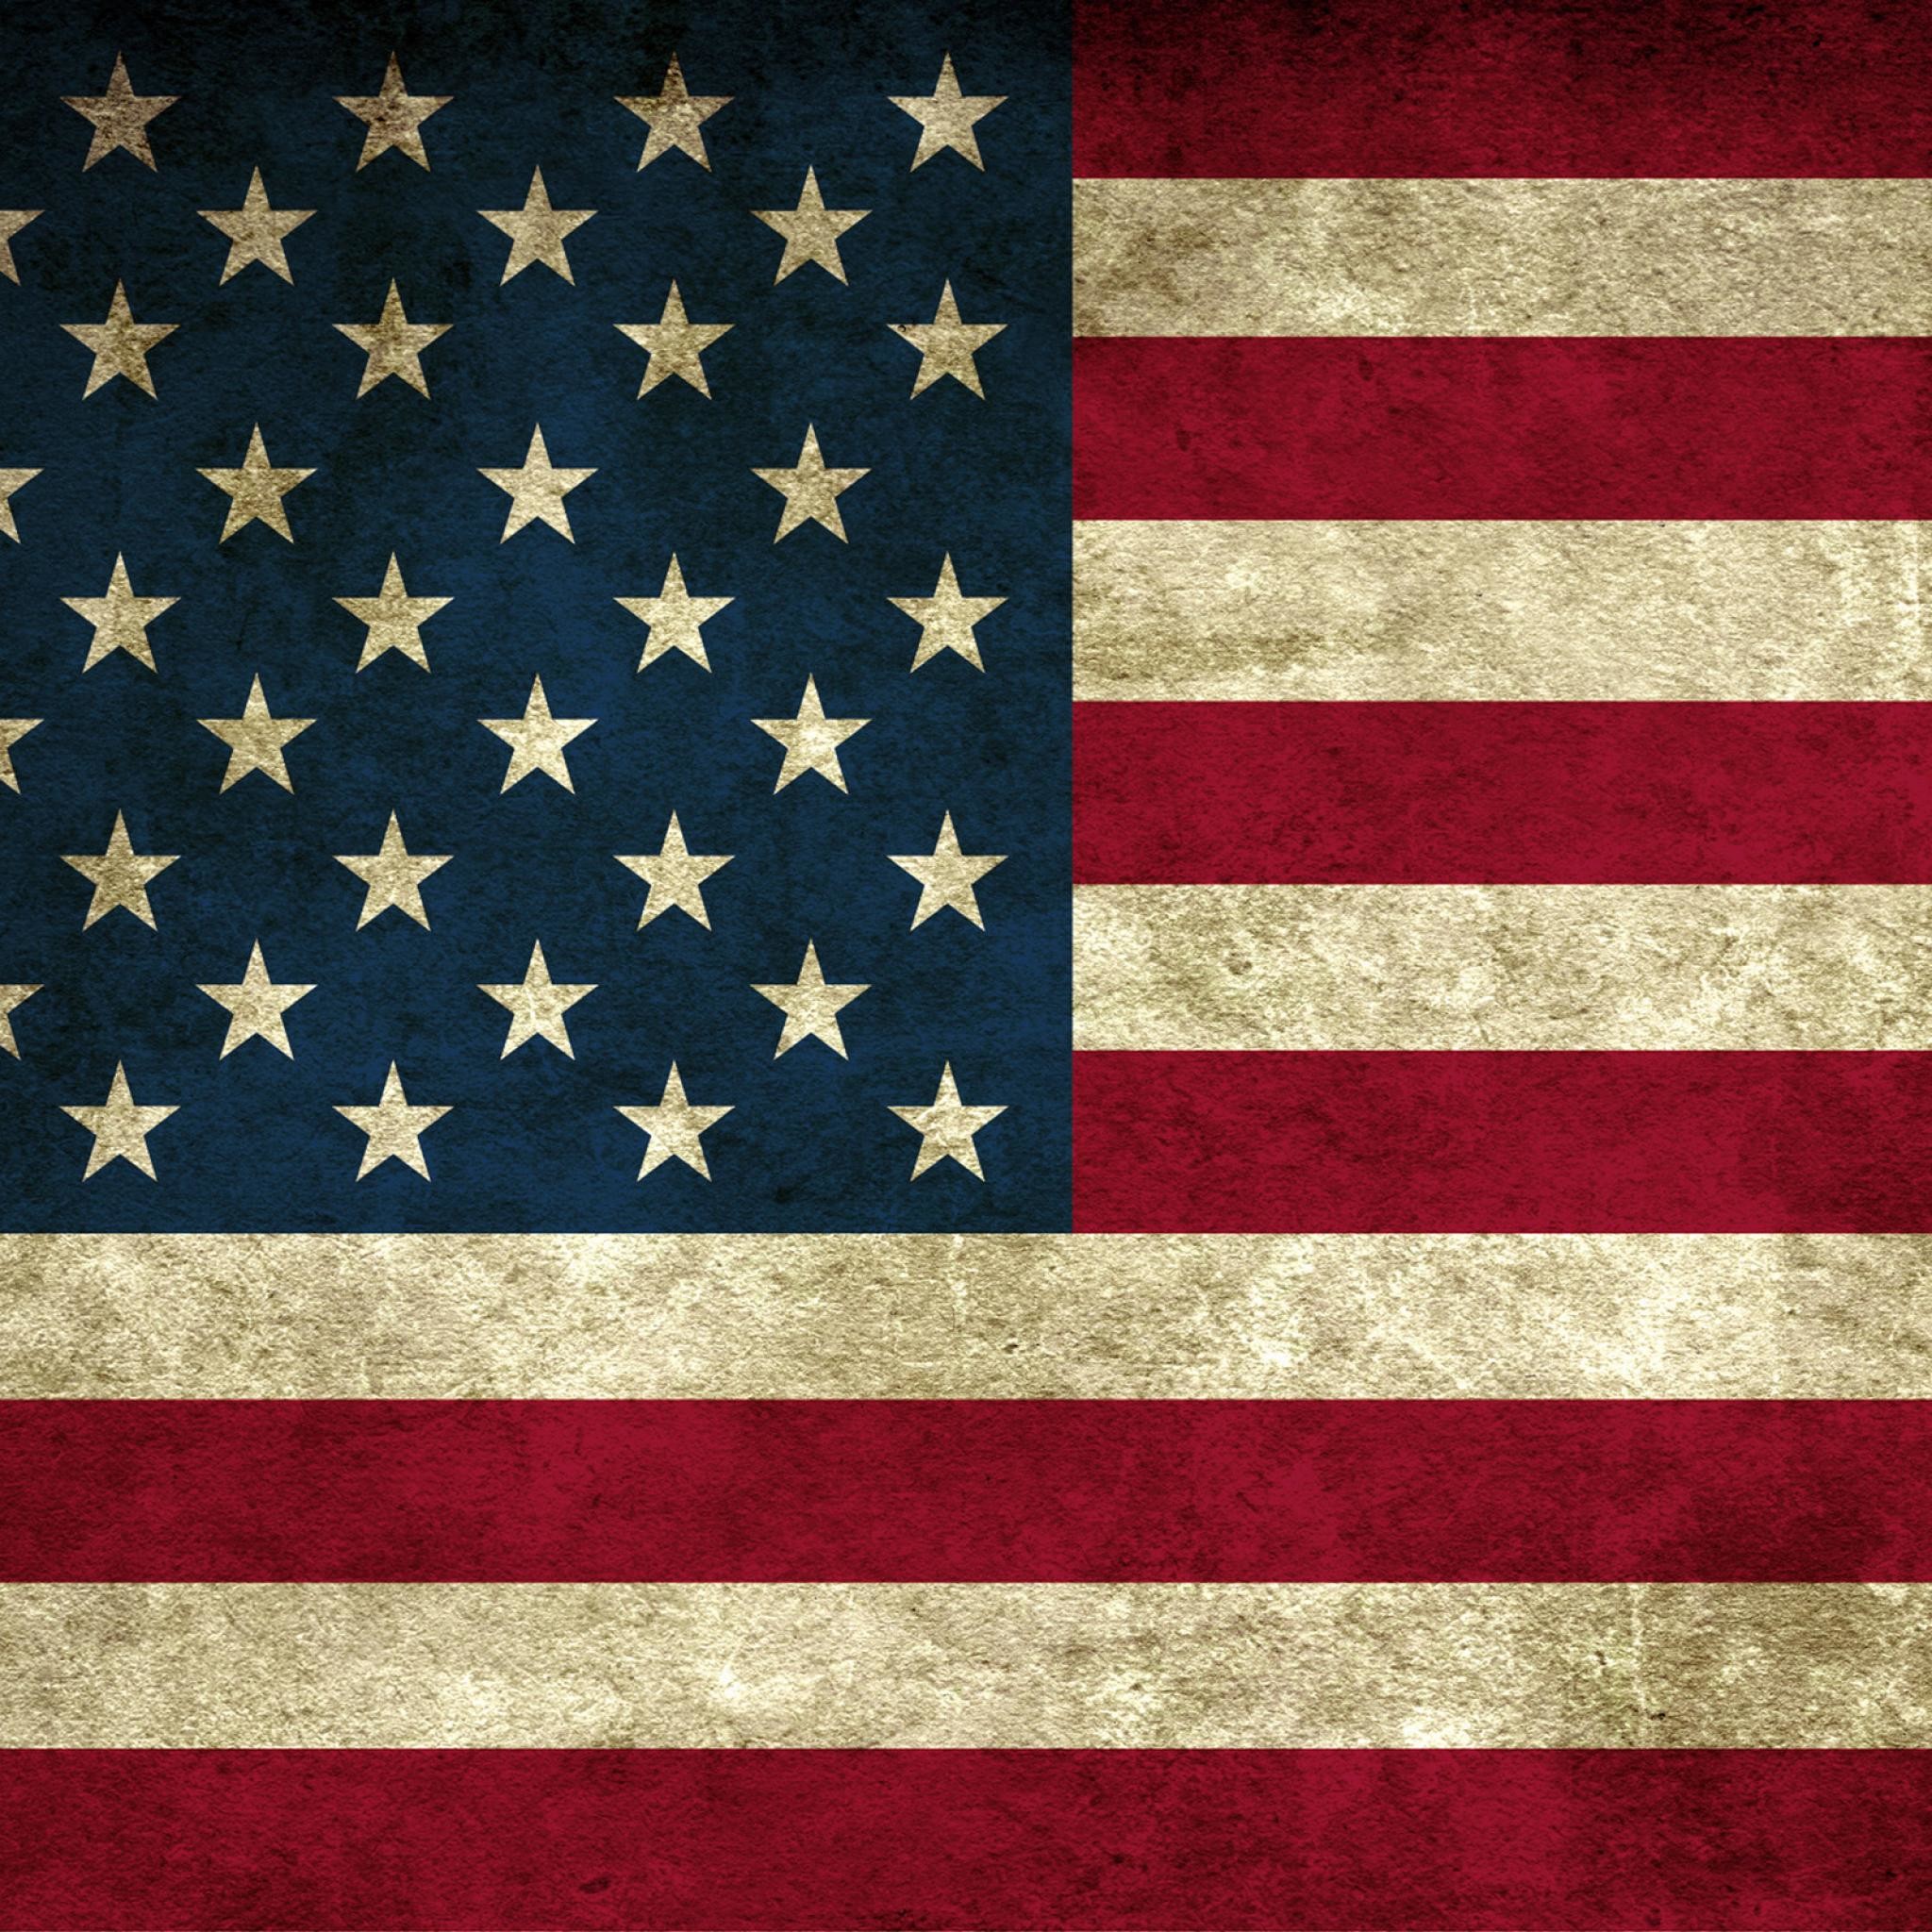 2048x2048 Flag HD Wallpapers for Desktop, iPhone, iPad, and Android